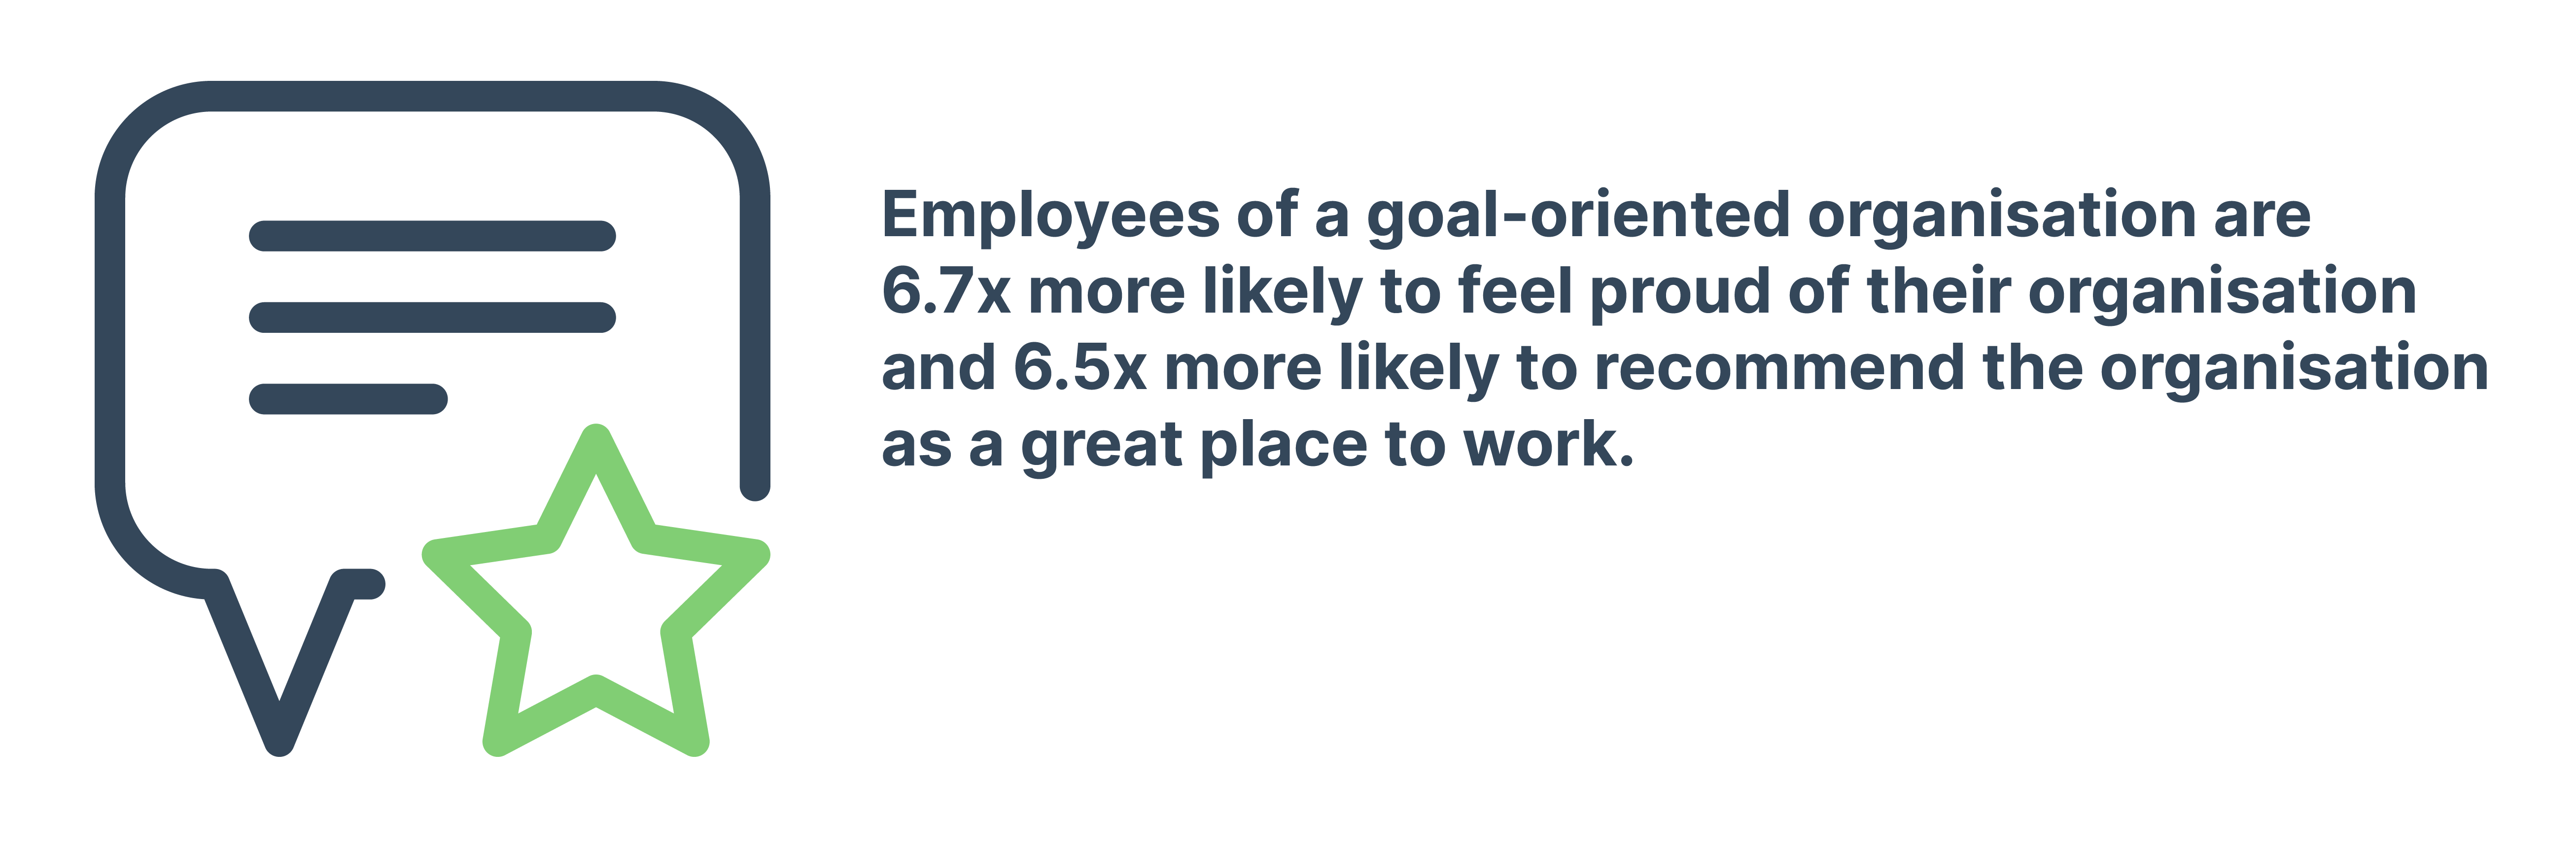 employees in goal orientated organisation are more likely to be proud